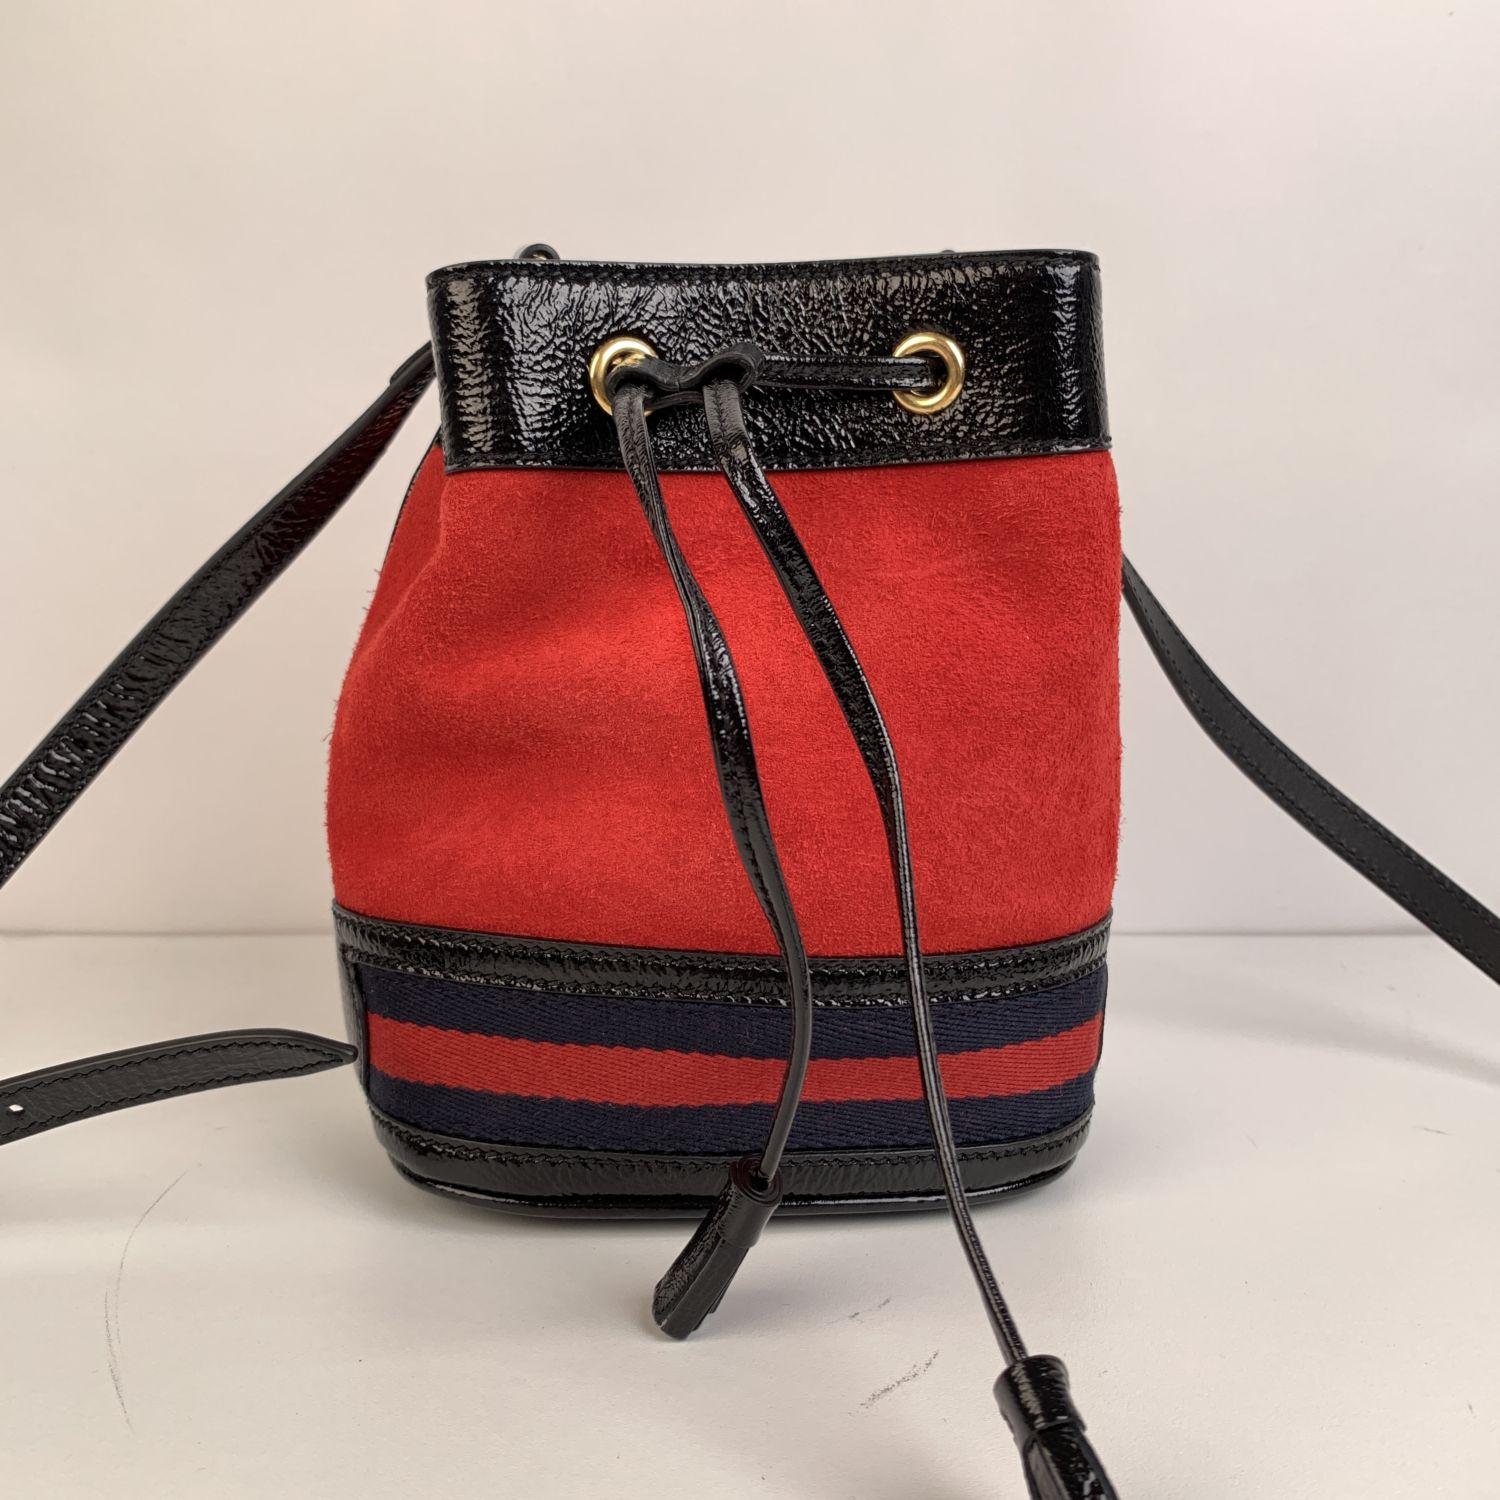 Gucci Ophidia small bucket bag in red suede with black patent leather trim. Blue/Red/Blue signature web detailing on the bottom part of the bag. Drawstring closure on top. Adjustable shoulder strap. Beige suede lining. 'GUCCI - made in Italy' tag